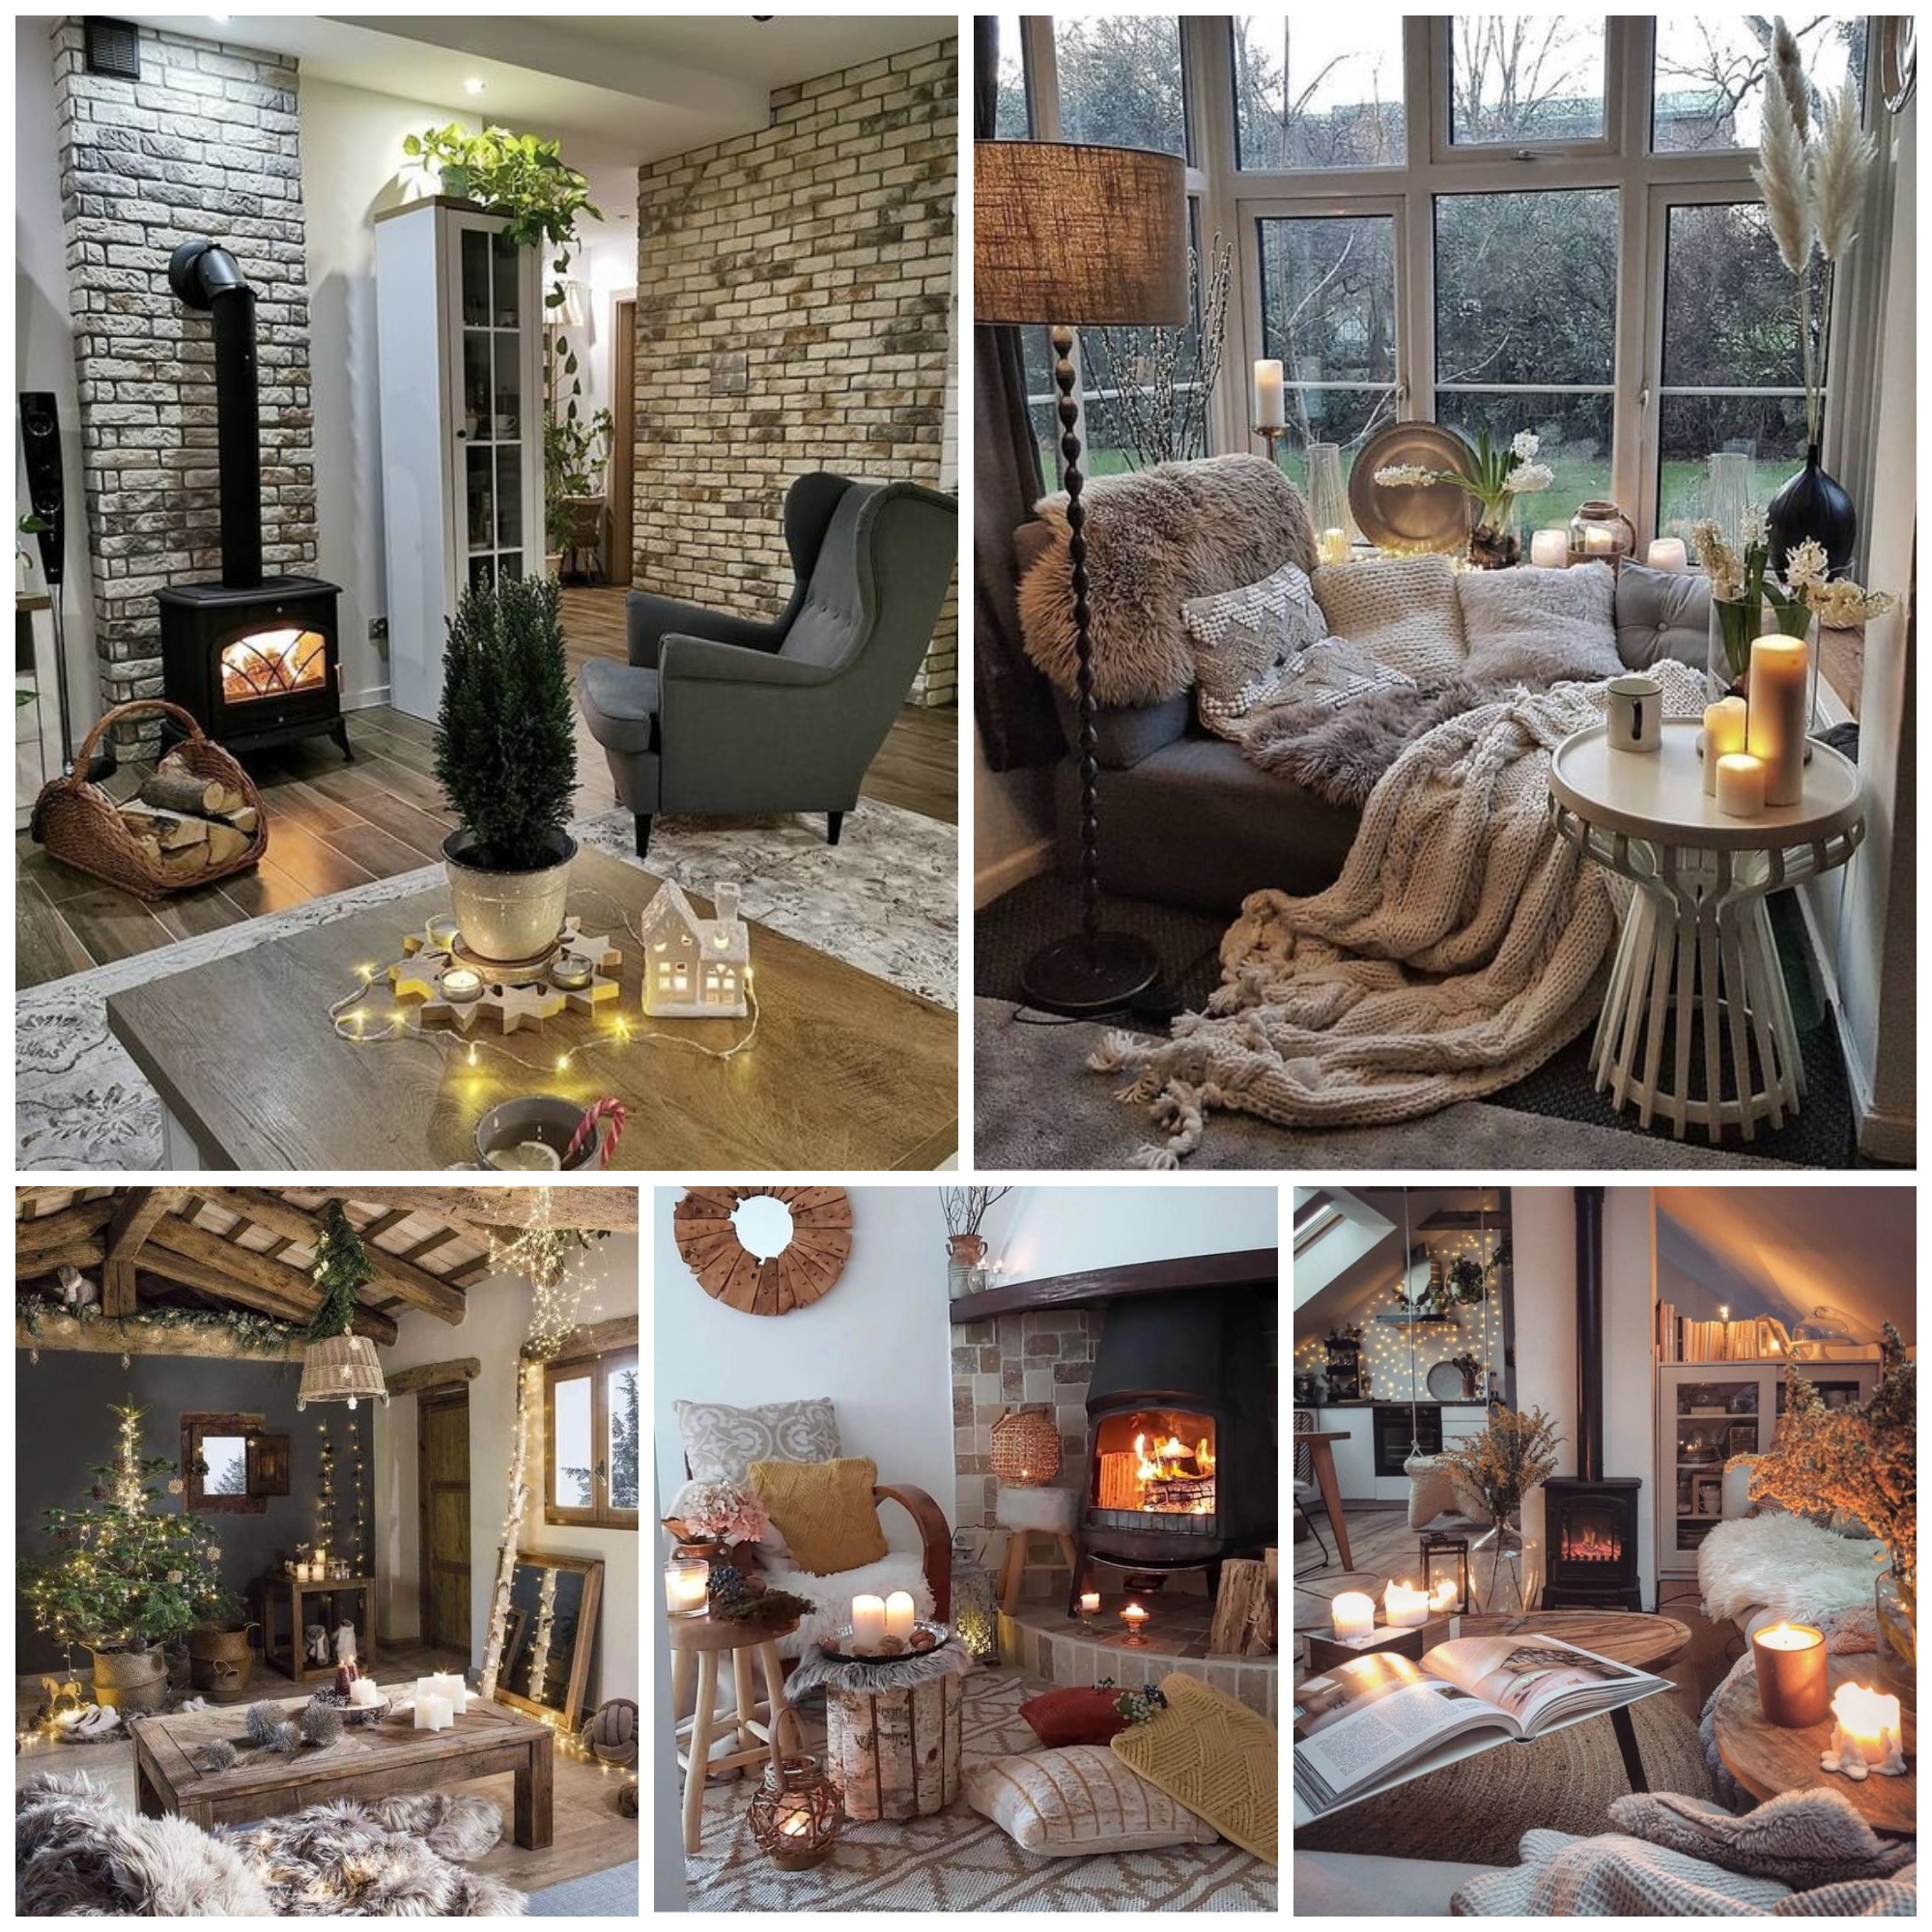 Chic Winter Decorating Ideas for an Ultra Cozy Home